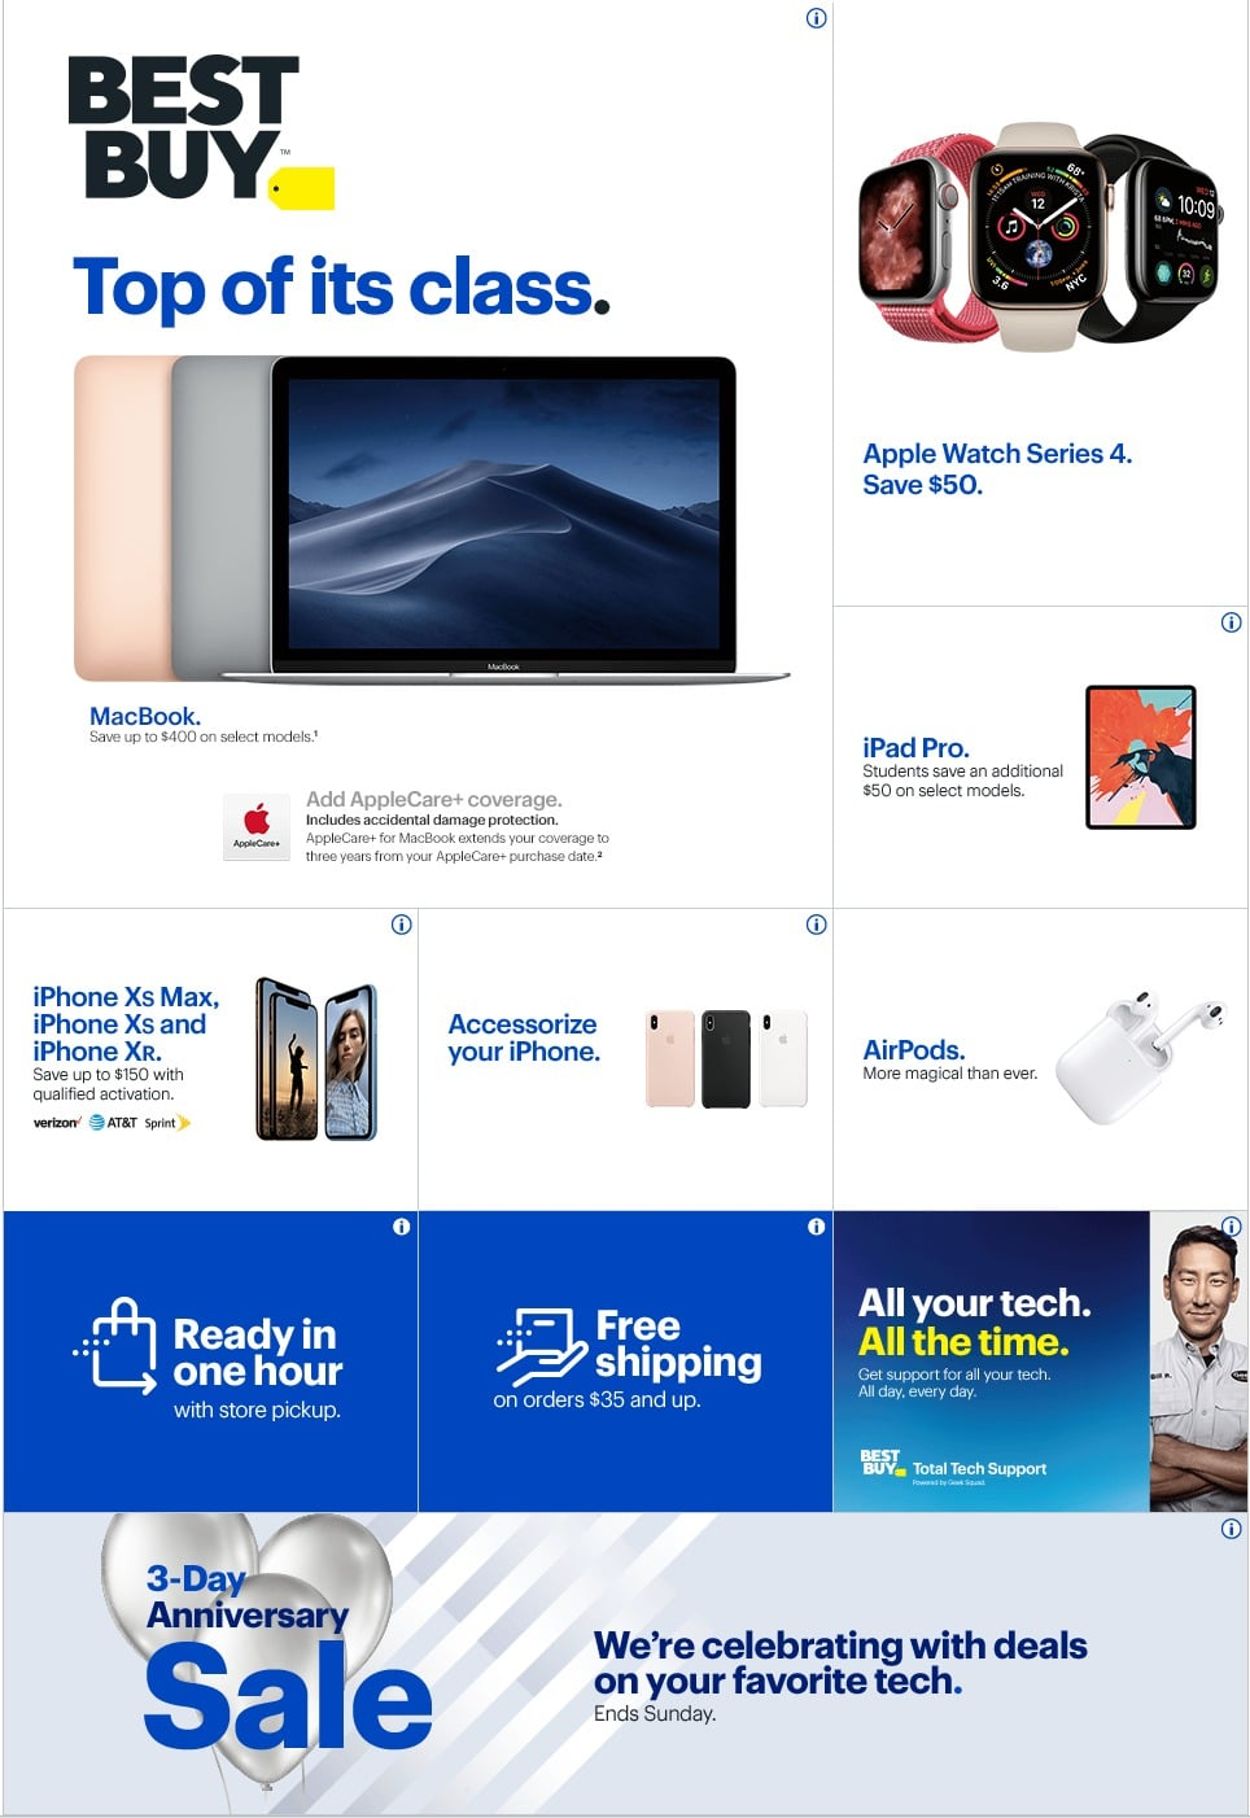 can i purchase applecare if i bought my macbook at bestbuy